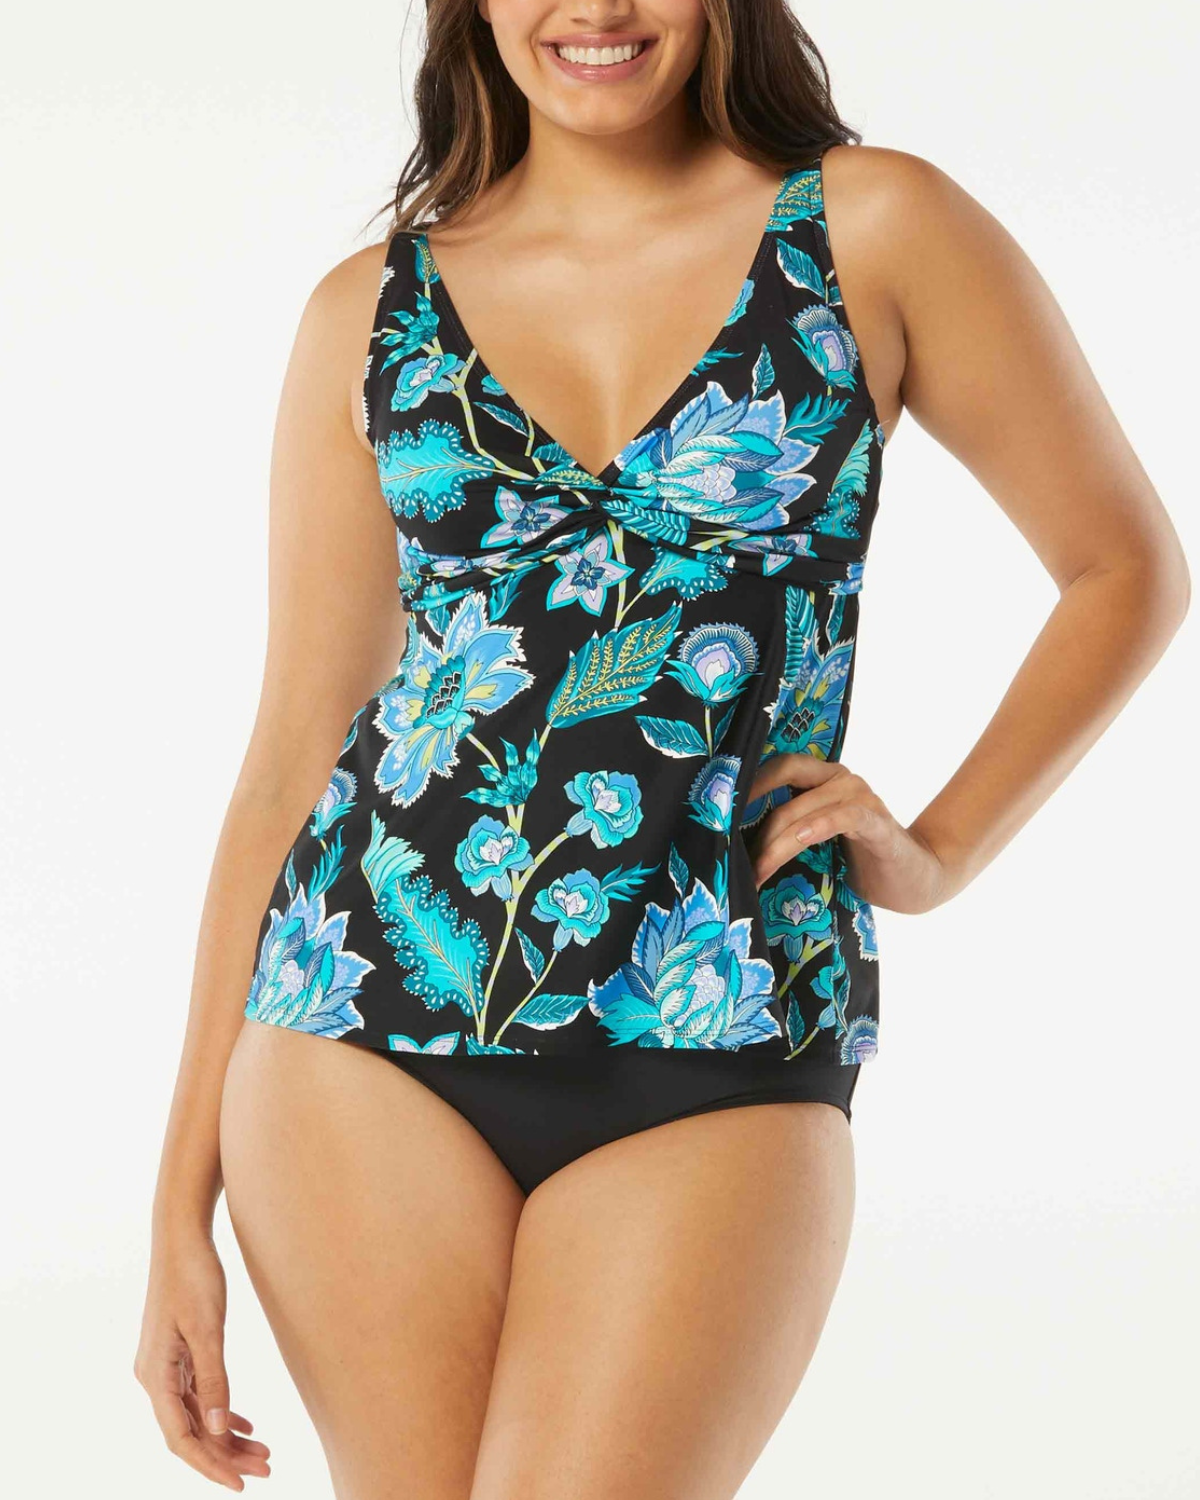 Model wearing a v neck tankini top in black with a green and blue floral print